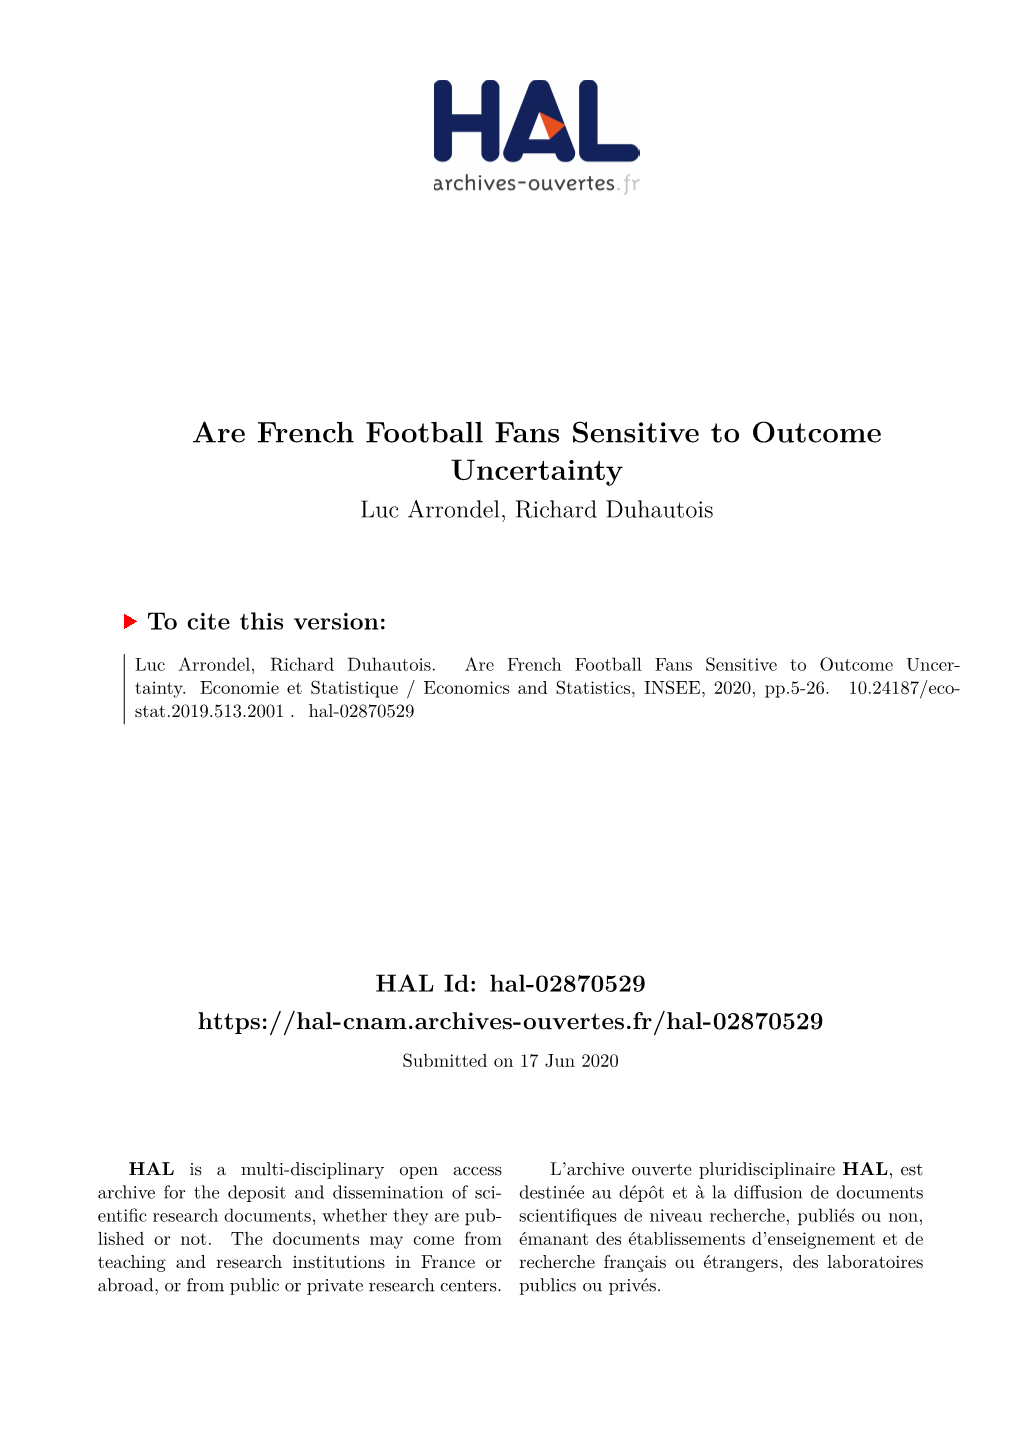 Are French Football Fans Sensitive to Outcome Uncertainty Luc Arrondel, Richard Duhautois